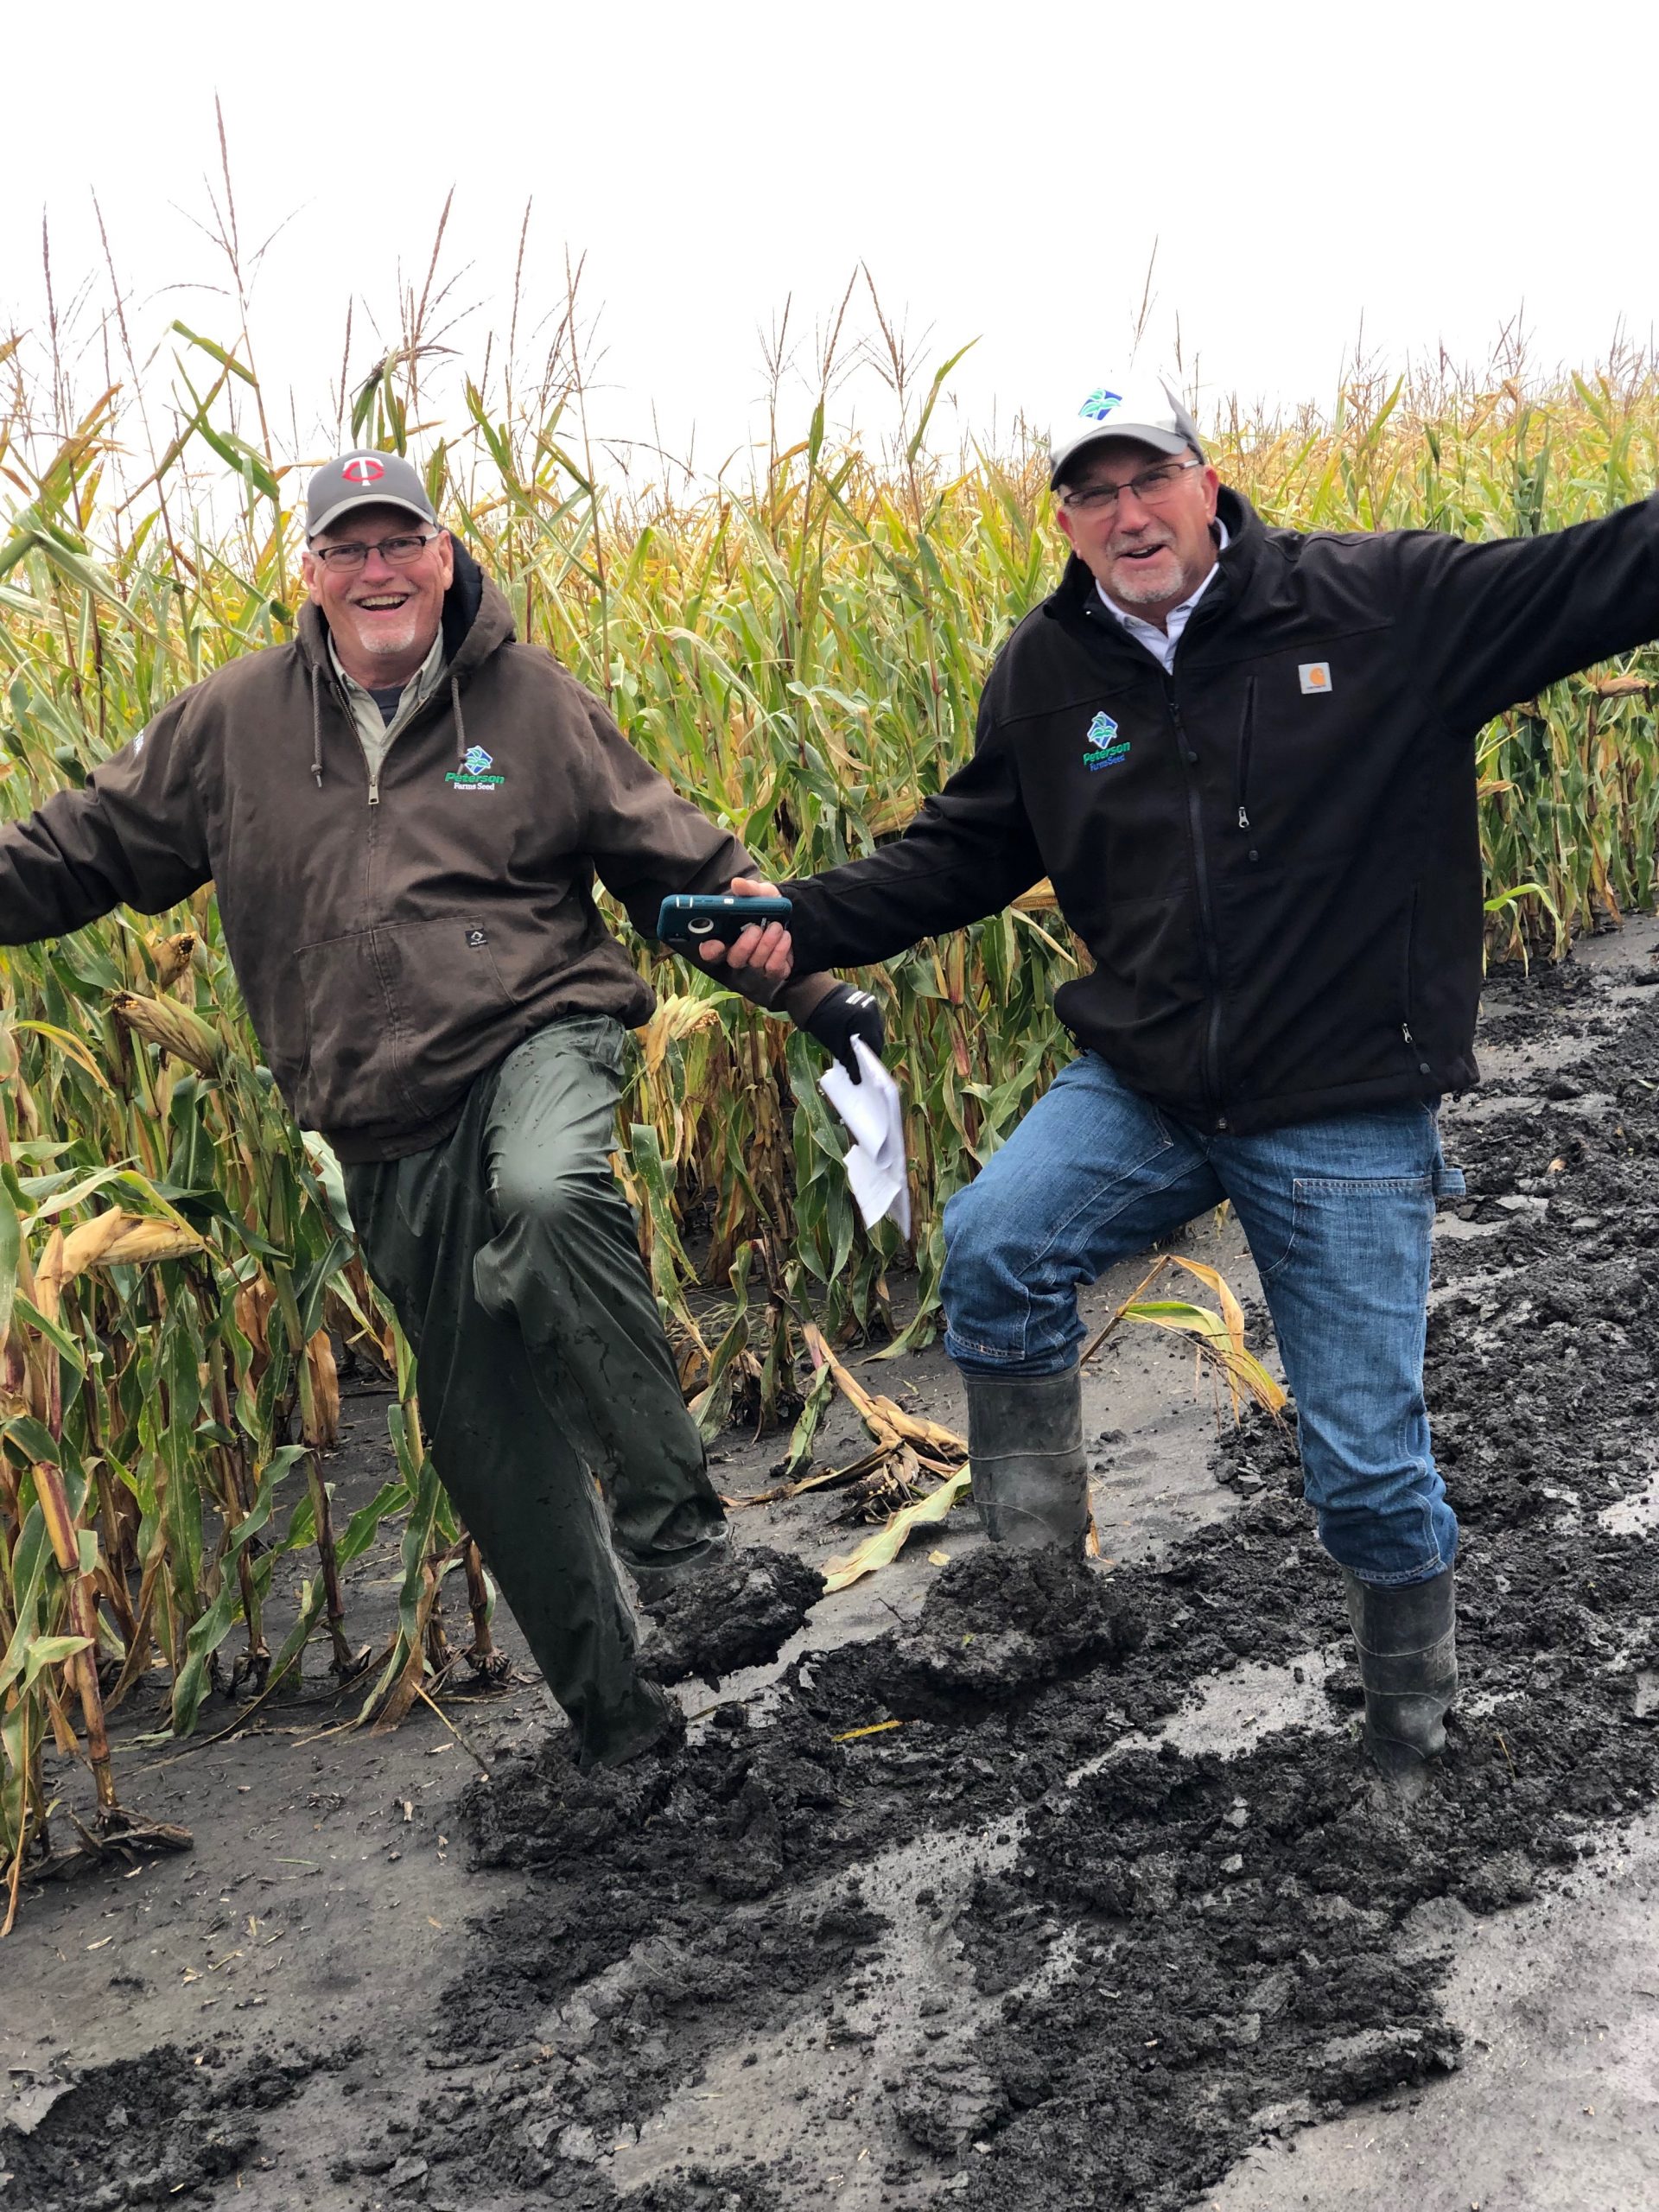 Mike and Dennis putting in the muddy corn.